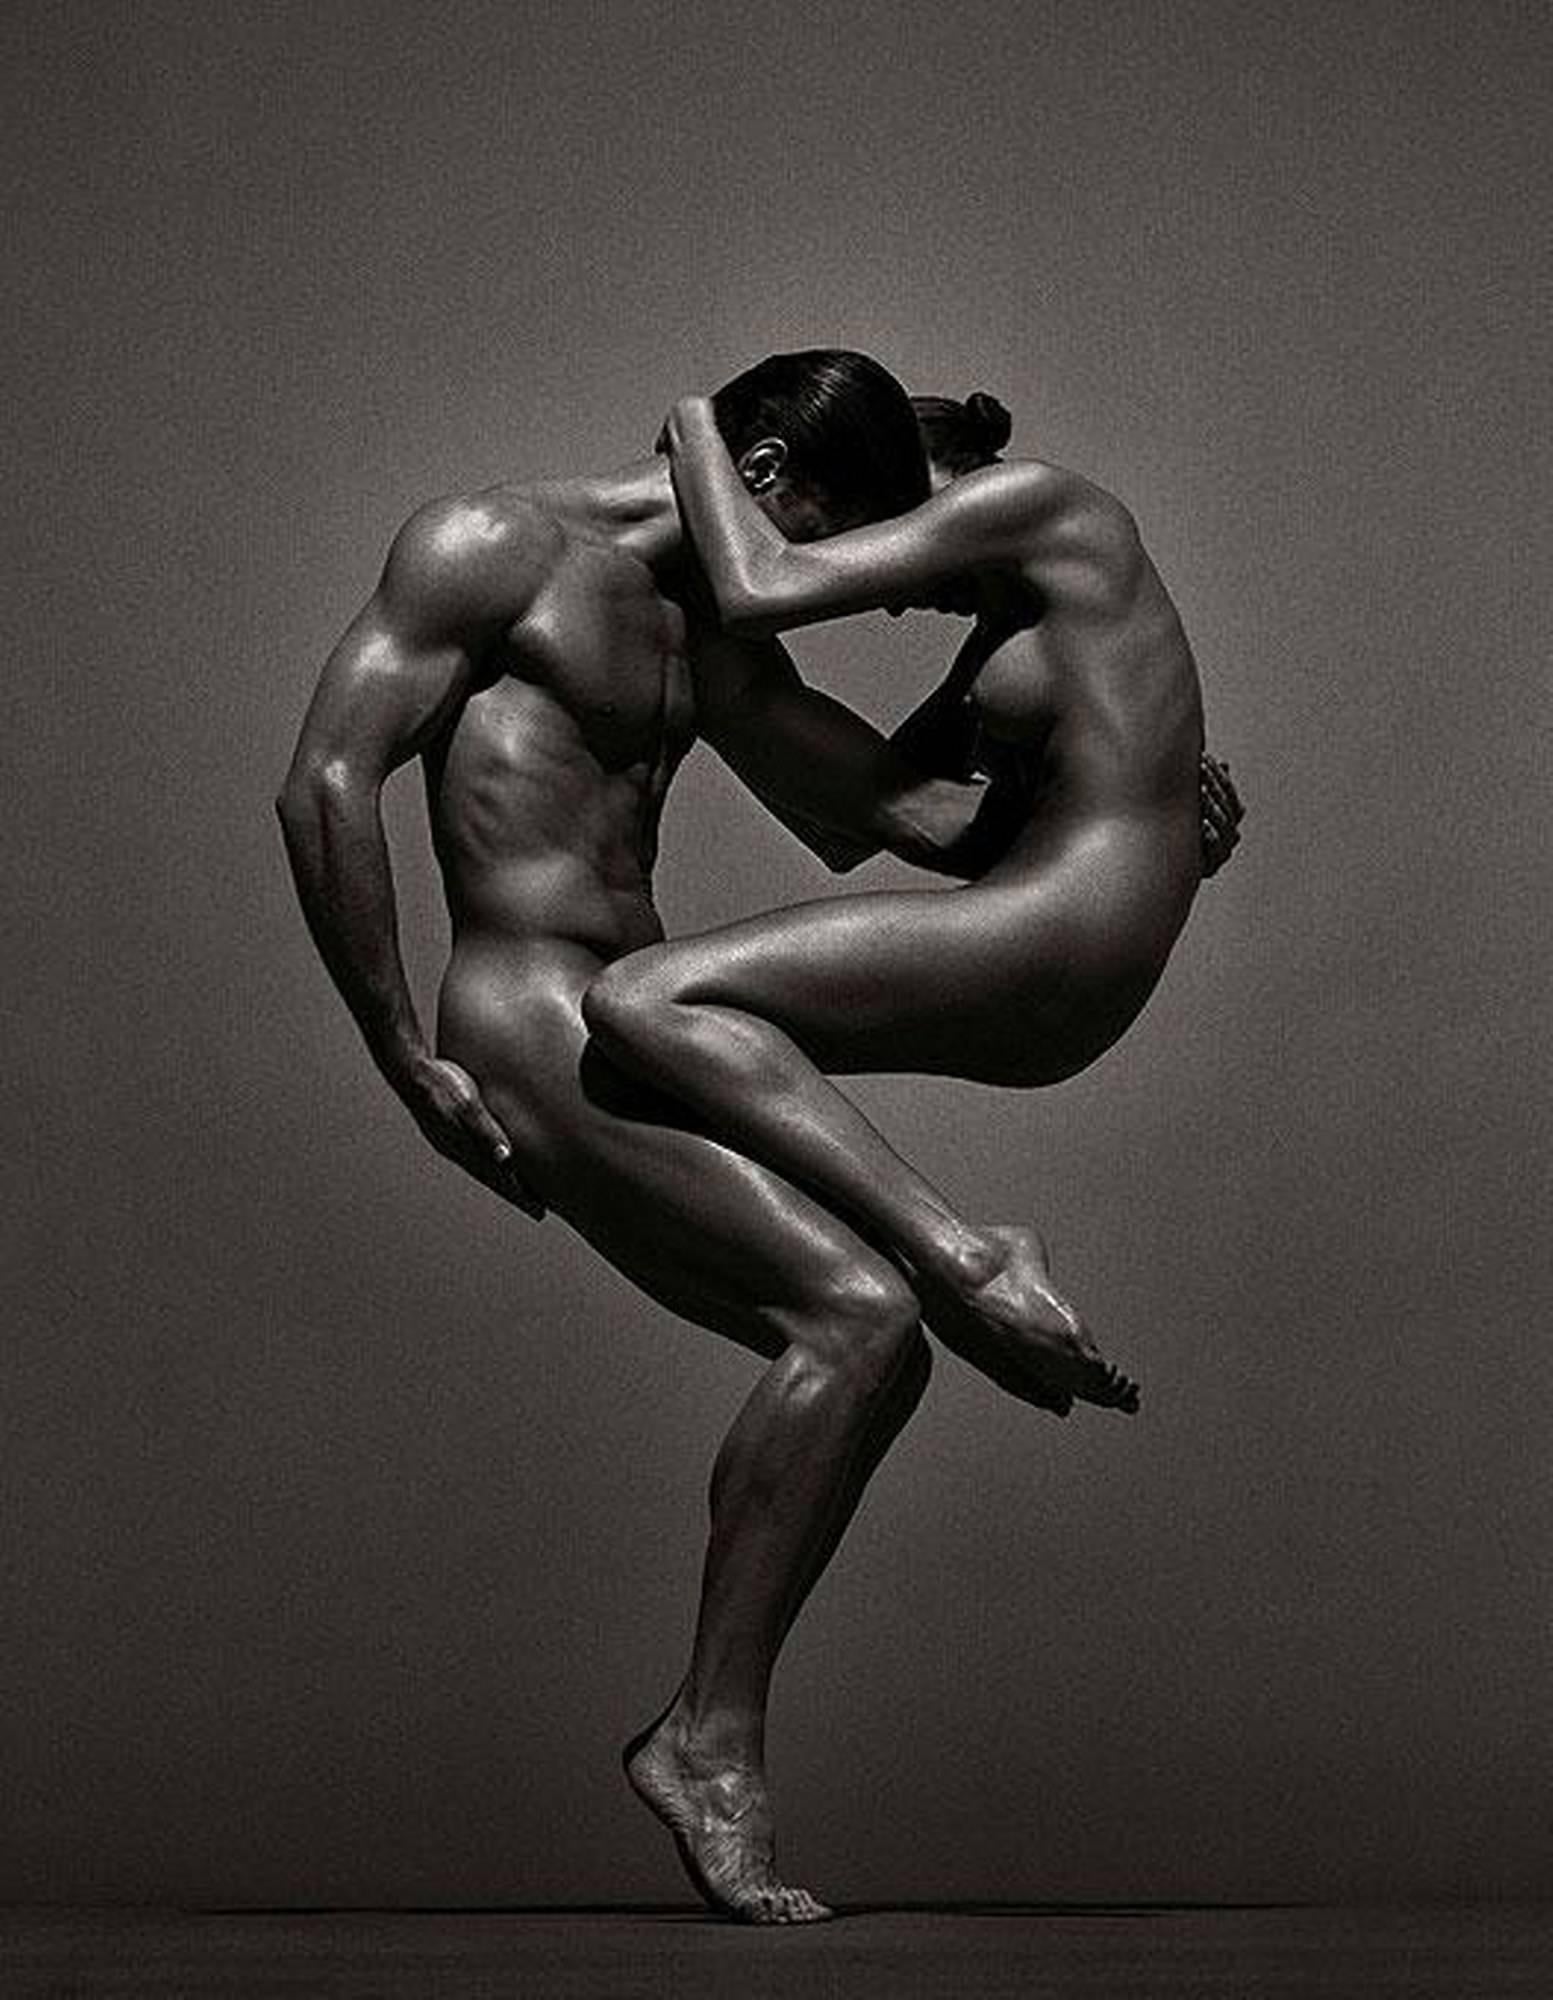 Andreas H. Bitesnich Figurative Photograph - Sina&Anthony, Vienna - douple nude in athletic pose, fine art photography, 1995